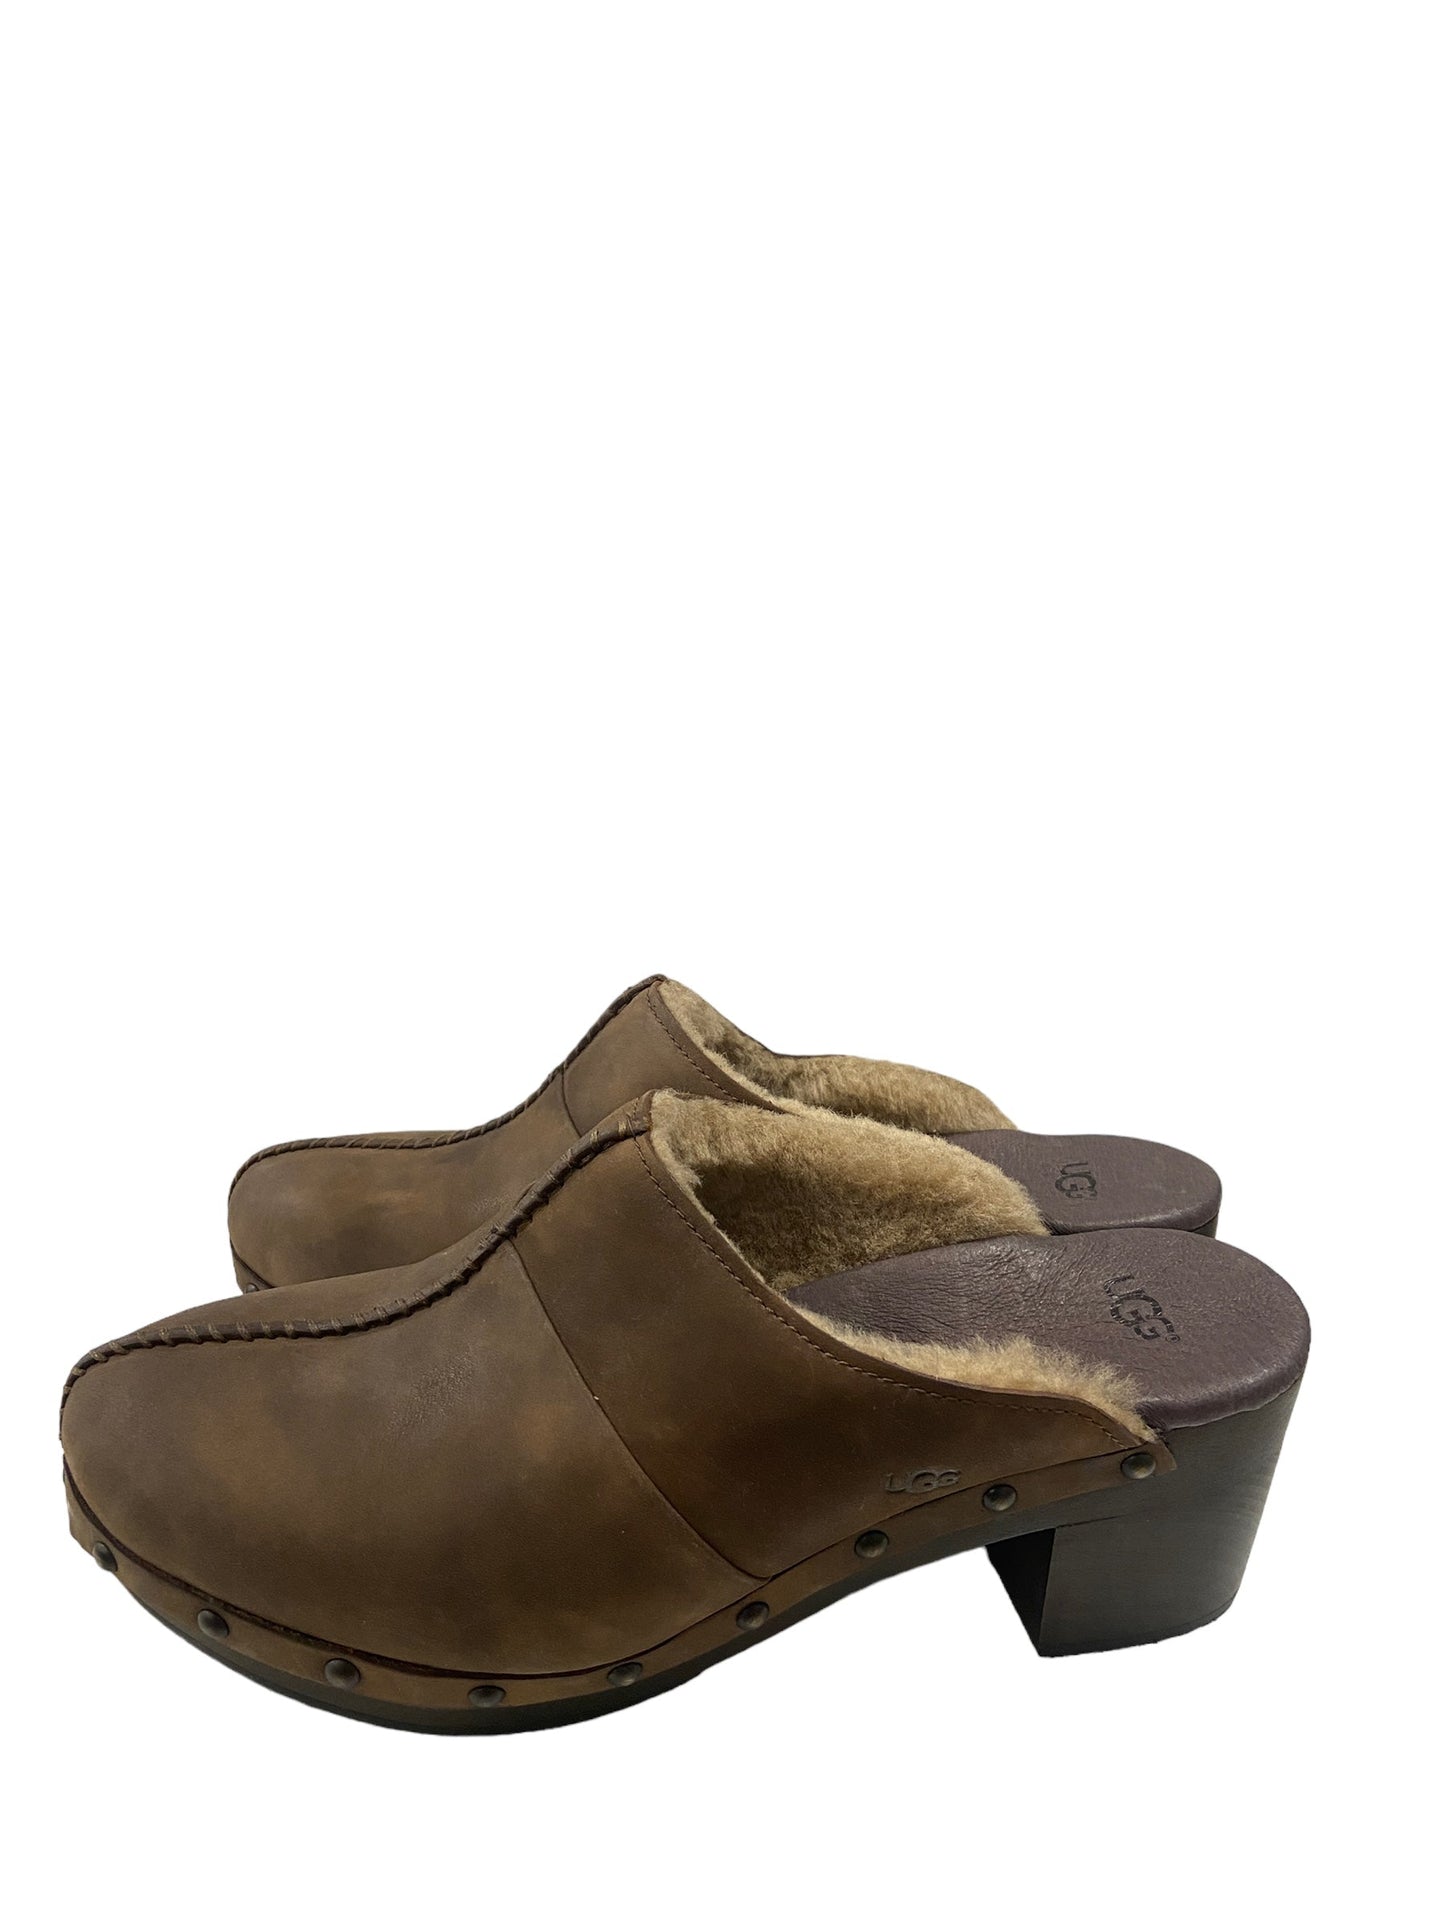 Shoes Heels Block By Ugg  Size: 9